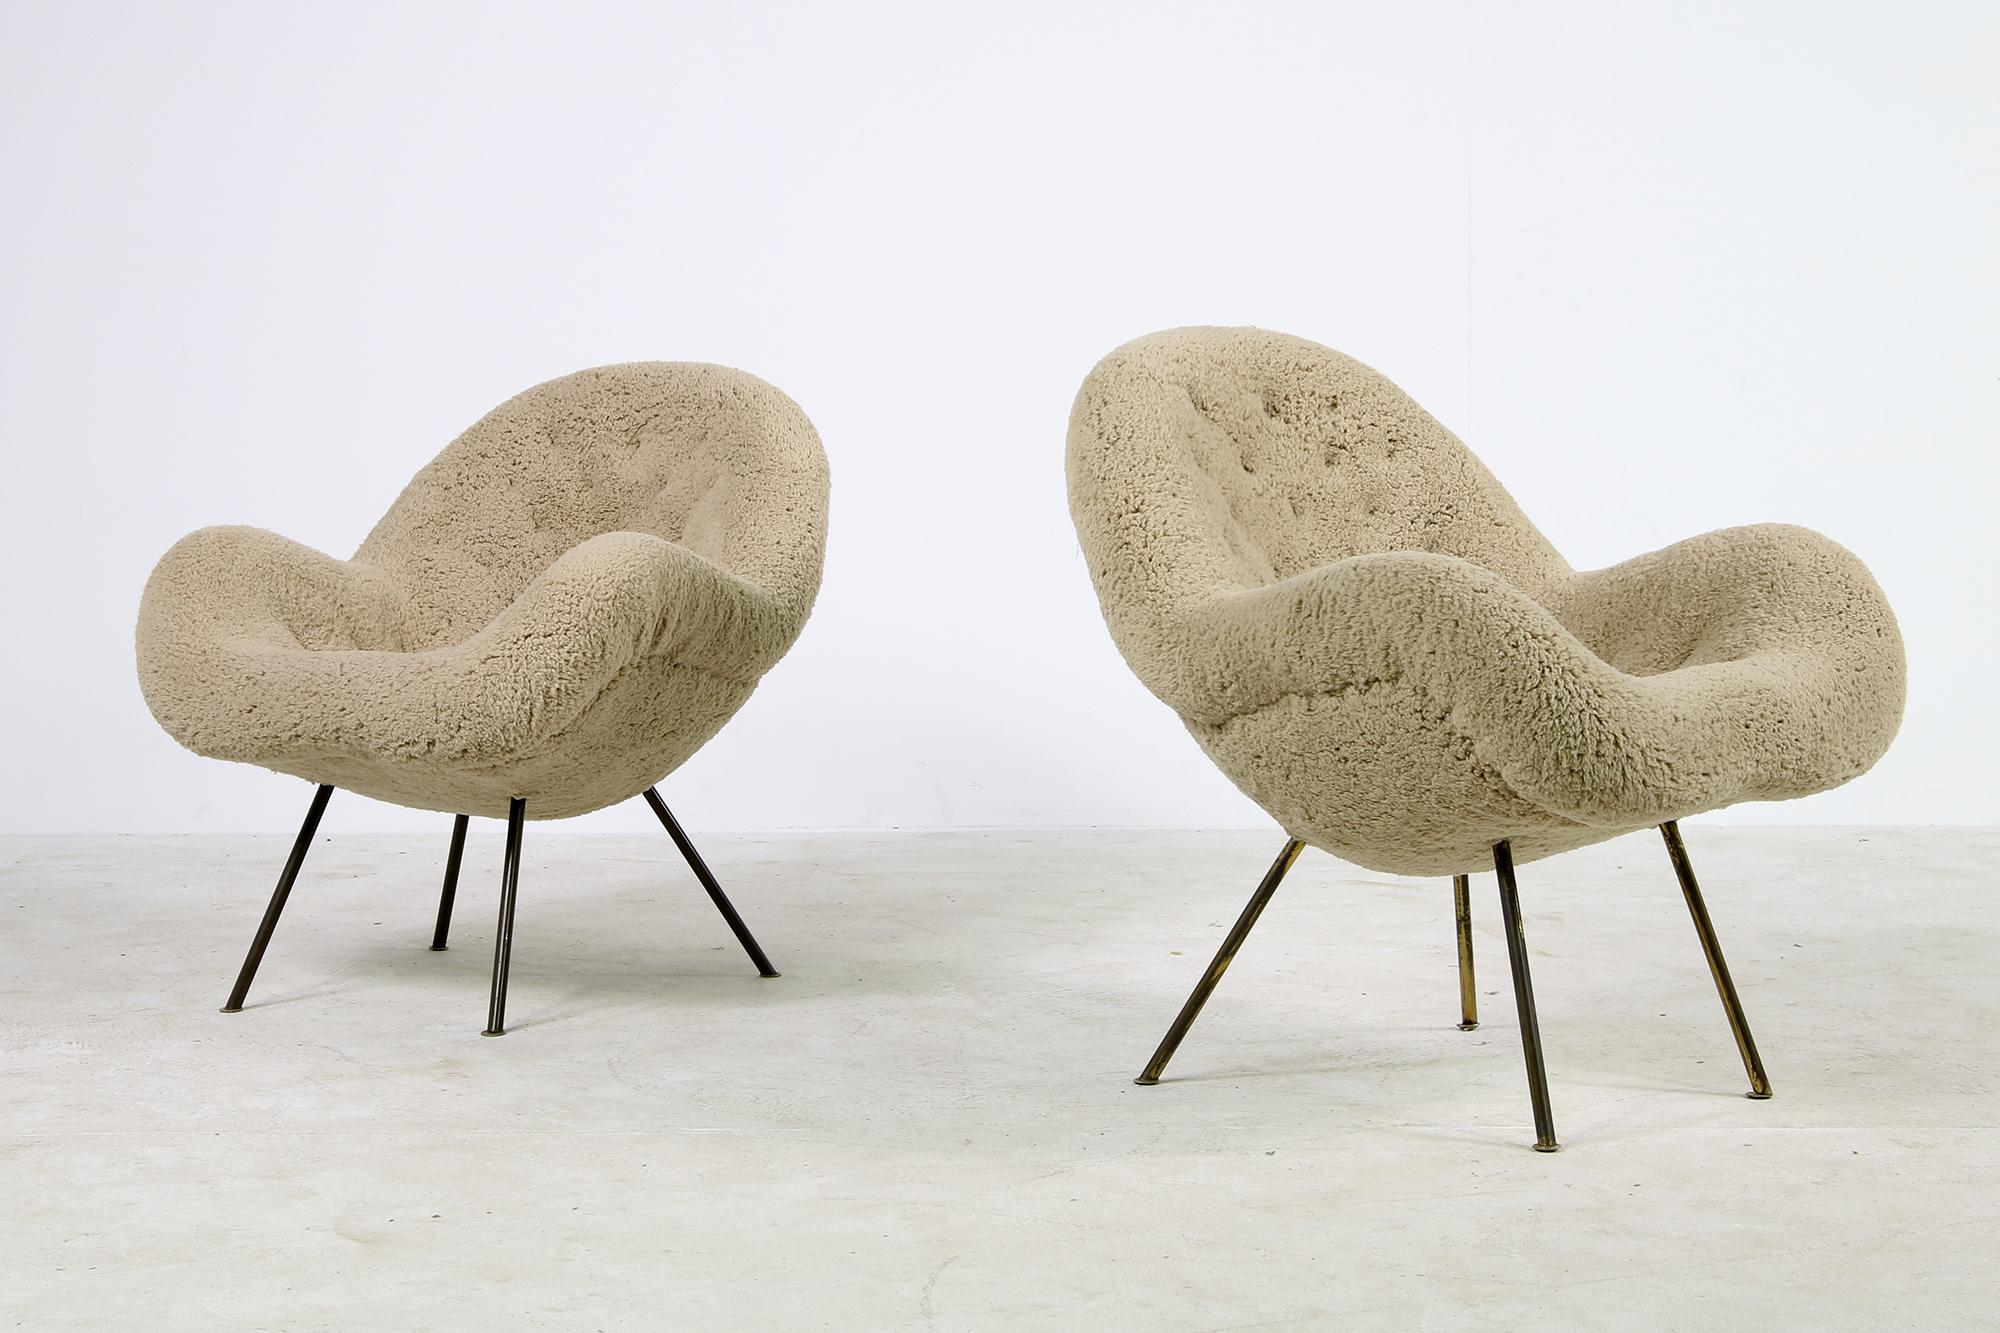 Beautiful and very rare 1950s pair of organic lounge chairs, by Fritz Neth, Germany circa 1950 with new upholstery and covered with new super soft teddy fur fabric, like sheepskin, but cotton mix fabric, very soft to the touch, legs are made of